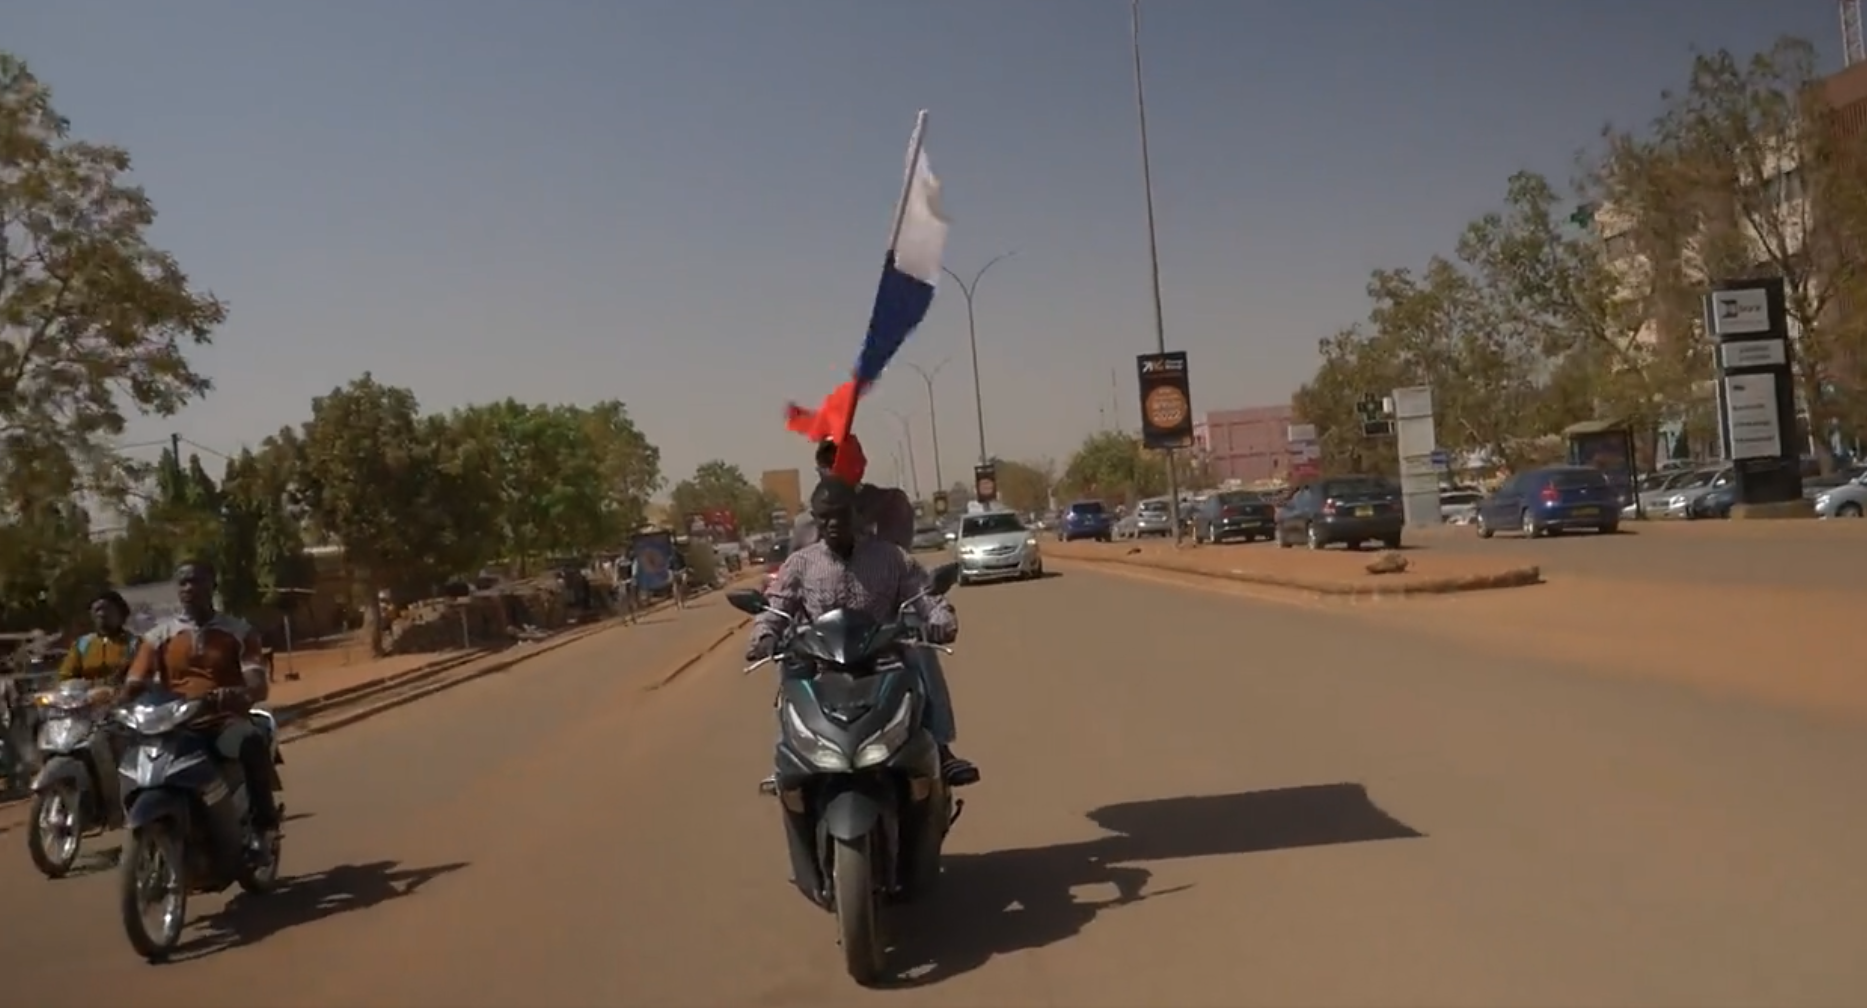 Screencap from a video by Henry Wilkins of "Two pro coup demonstrators seen flying a Russian flag through the streets of Ouagadougou" on January 25, 2022.